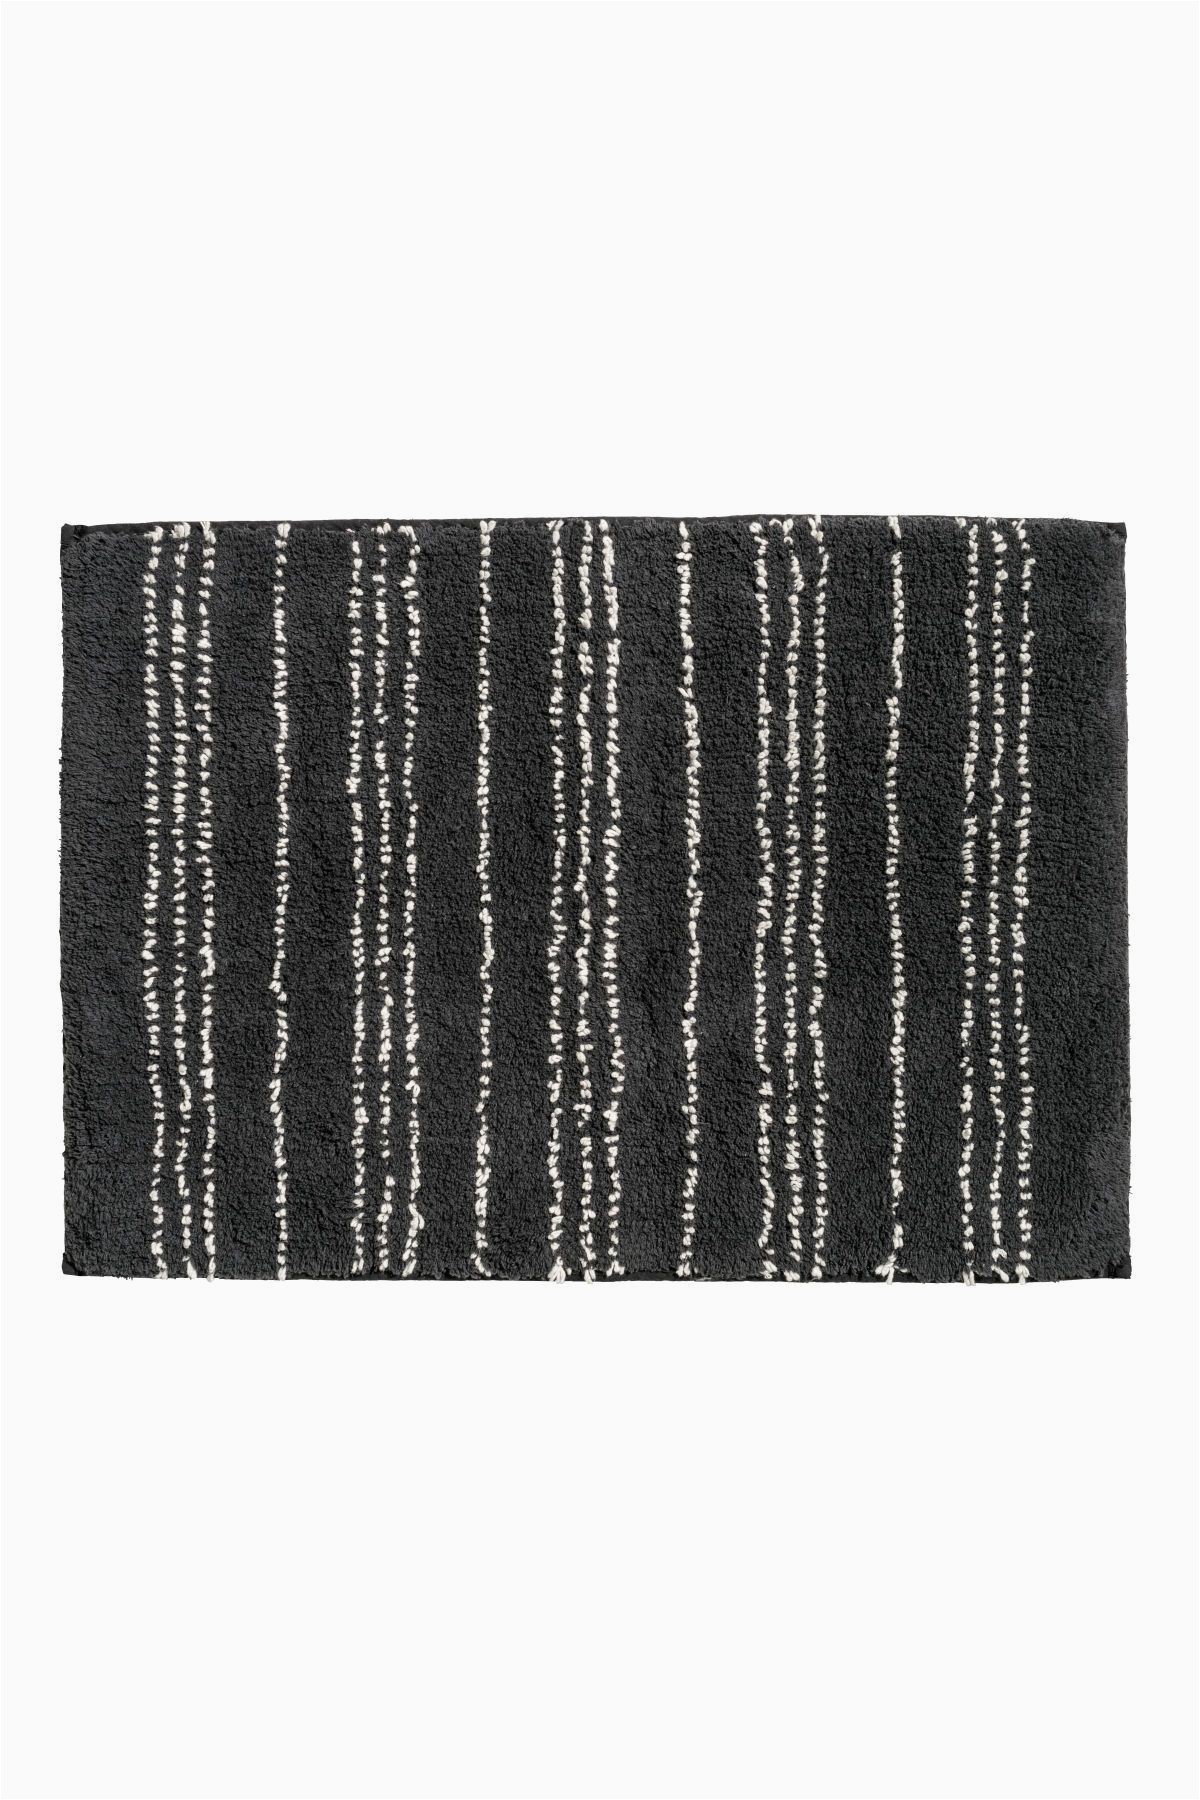 Charcoal Grey Bathroom Rugs Charcoal Gray White Patterned Rectangular Bath Mat In